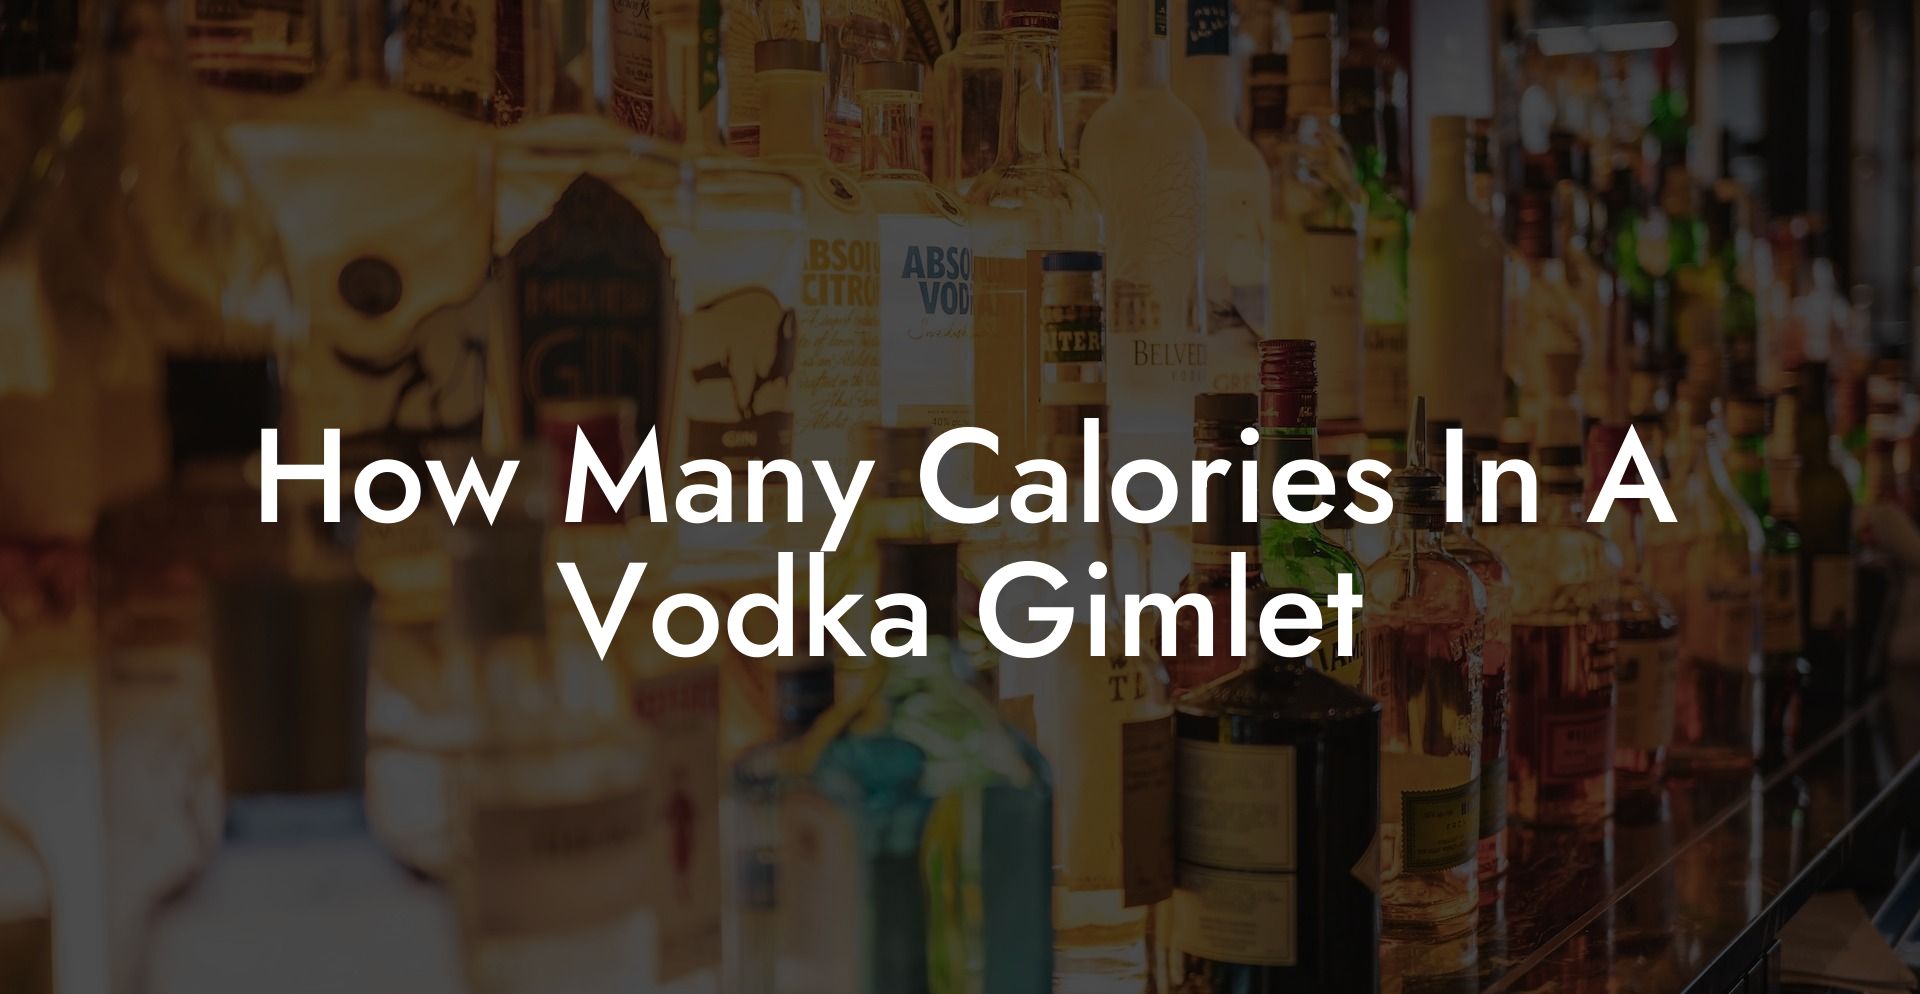 How Many Calories In A Vodka Gimlet